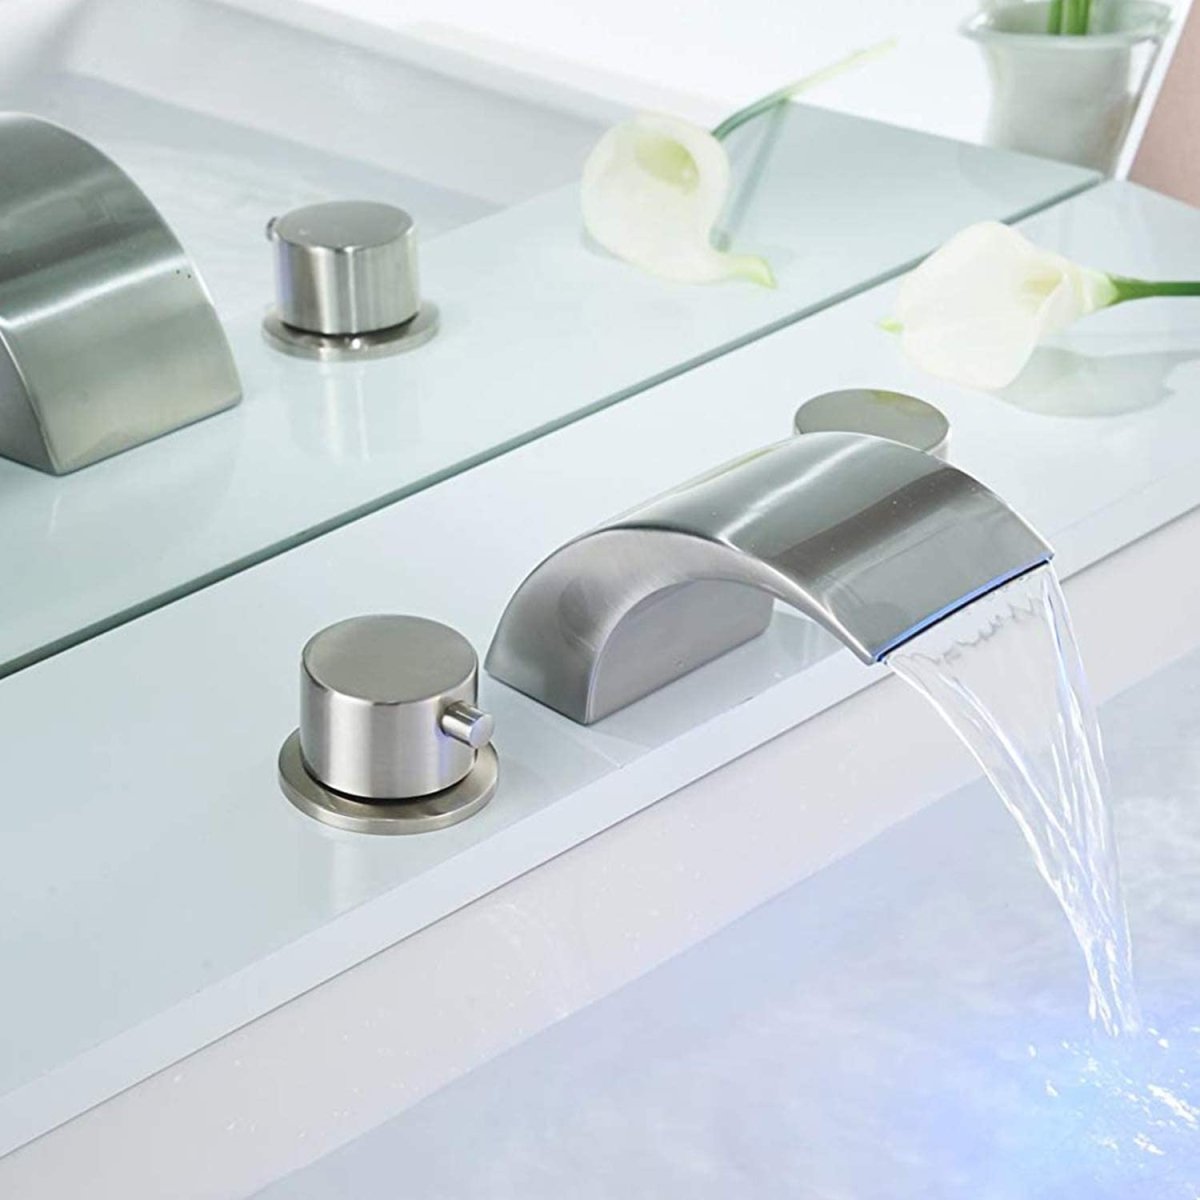 8 in 2-Handle Bathroom Faucet With Led Light Brushed Nickel - buyfaucet.com